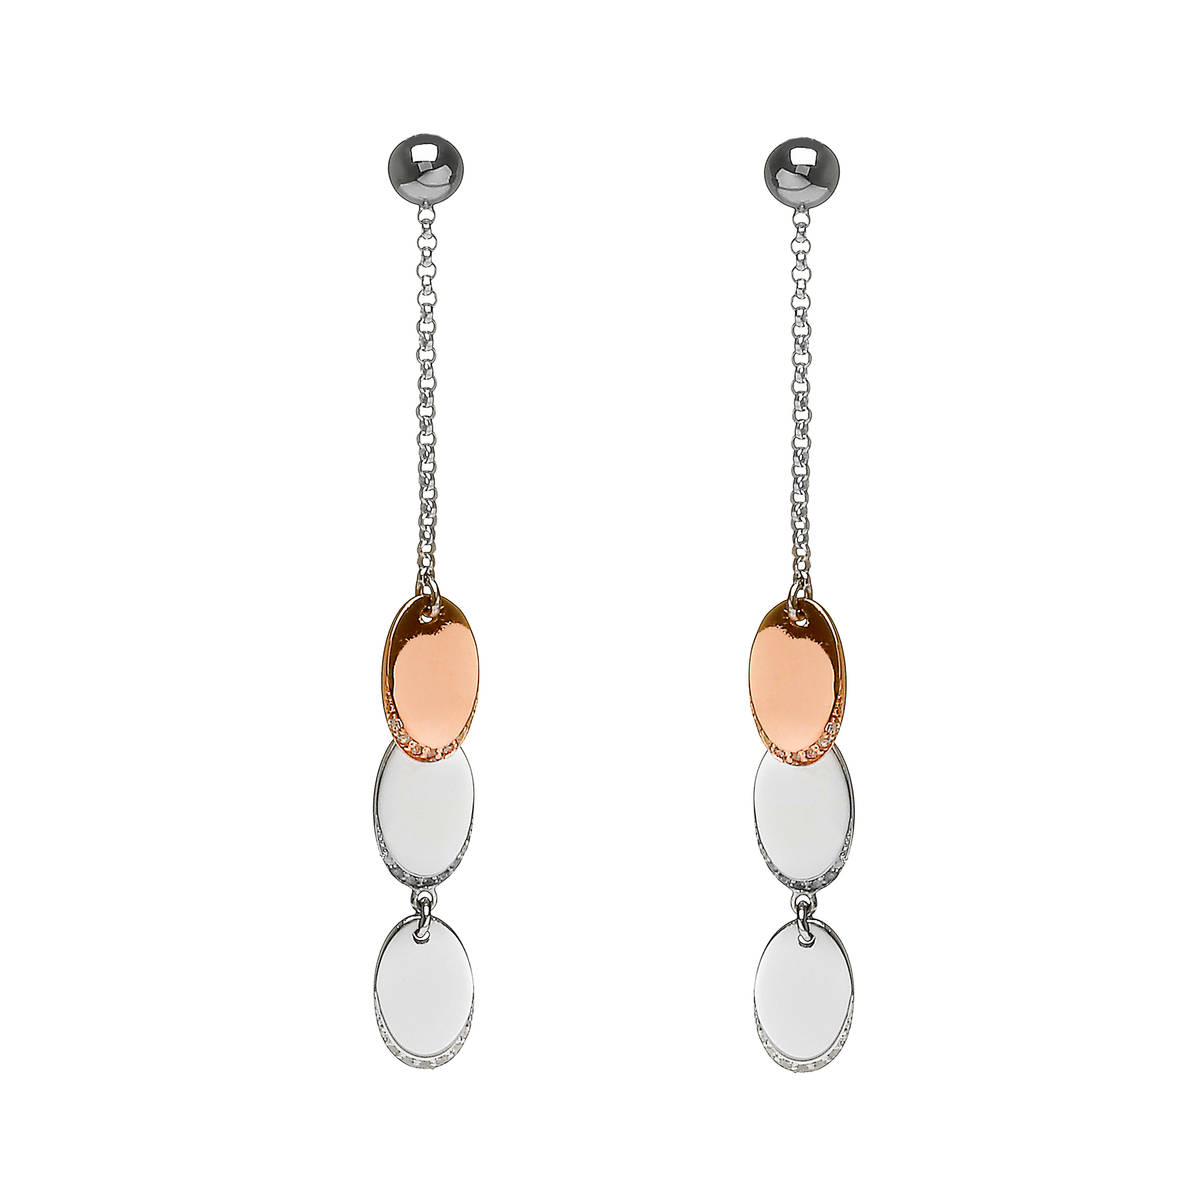 House of Lor silver/rose gold drop oval disc earrings 1st oval made from rare Irish goldddick/wwpck